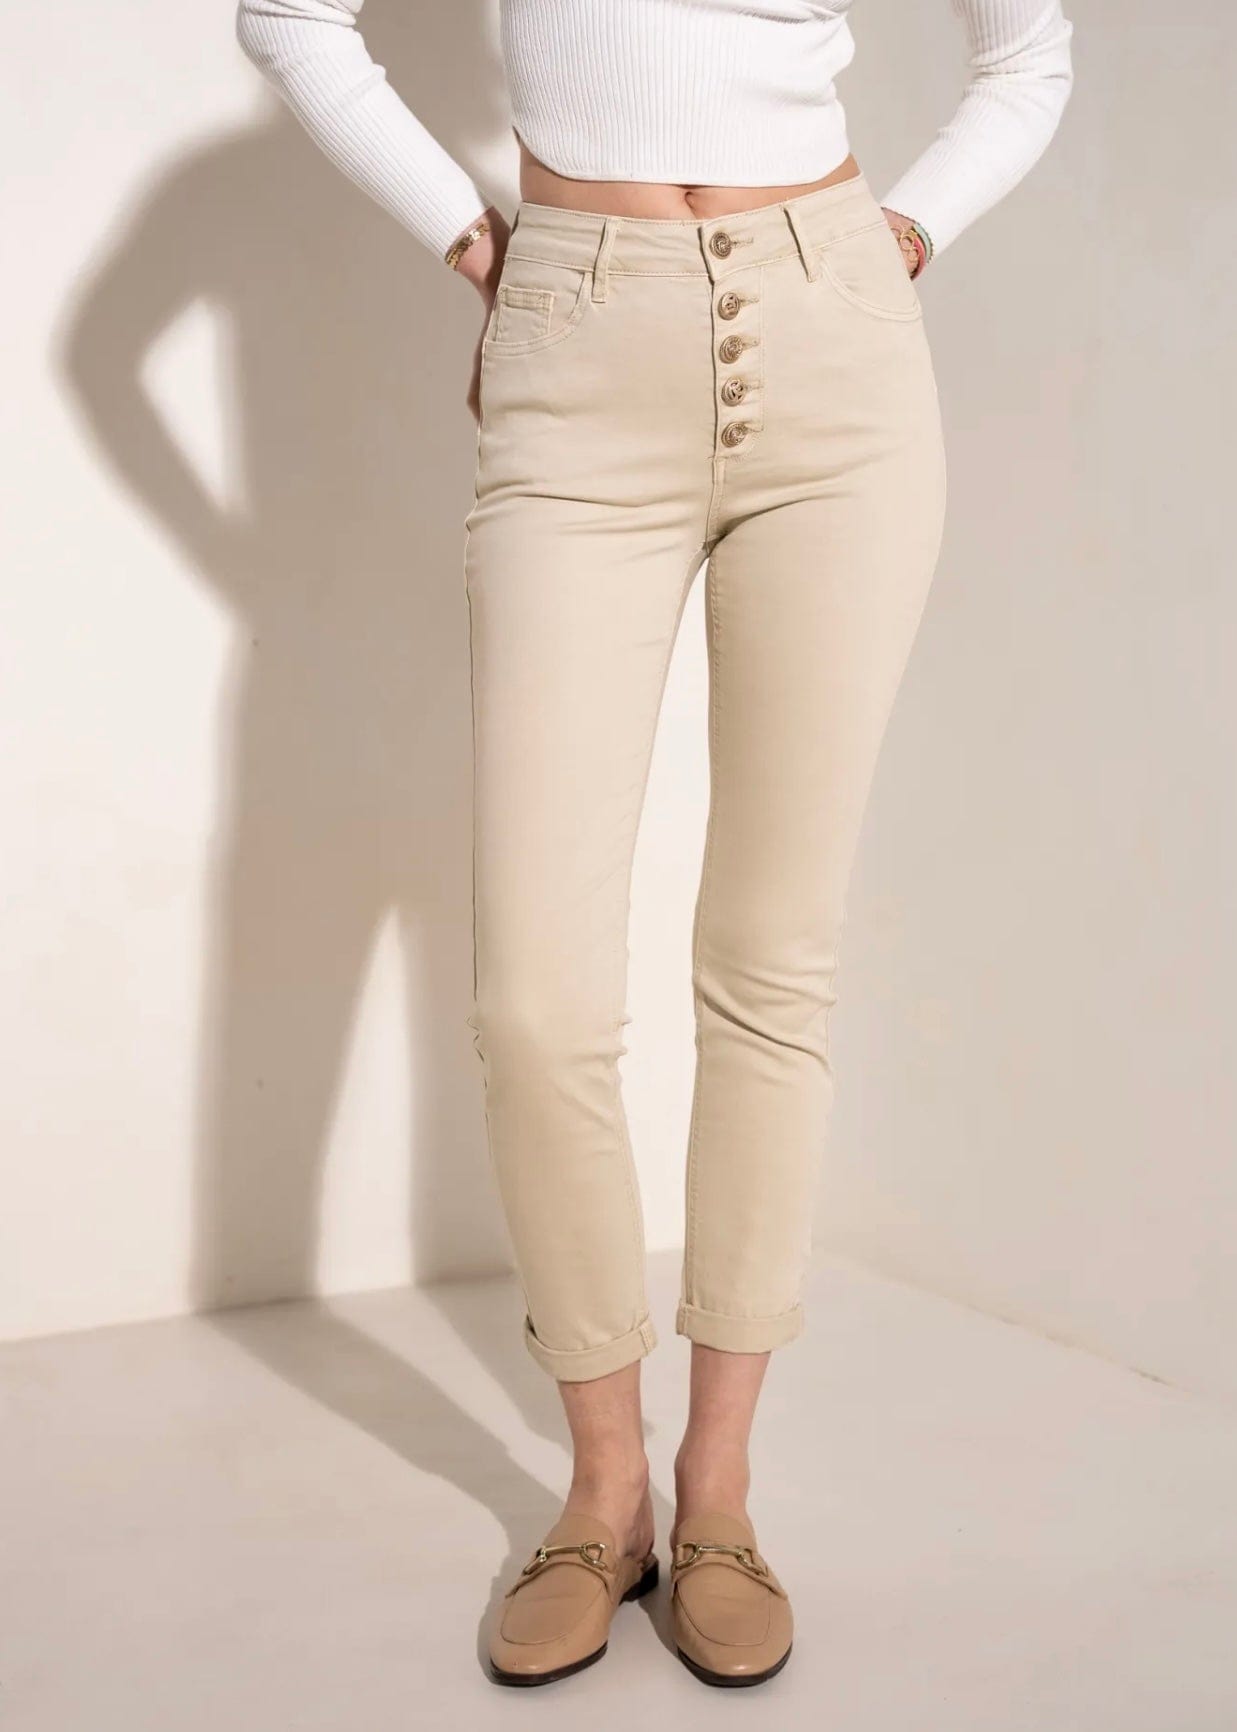 Mid-Rise Beige Jeans with Gold front Buttons - Tribute StoreTRIBUTE